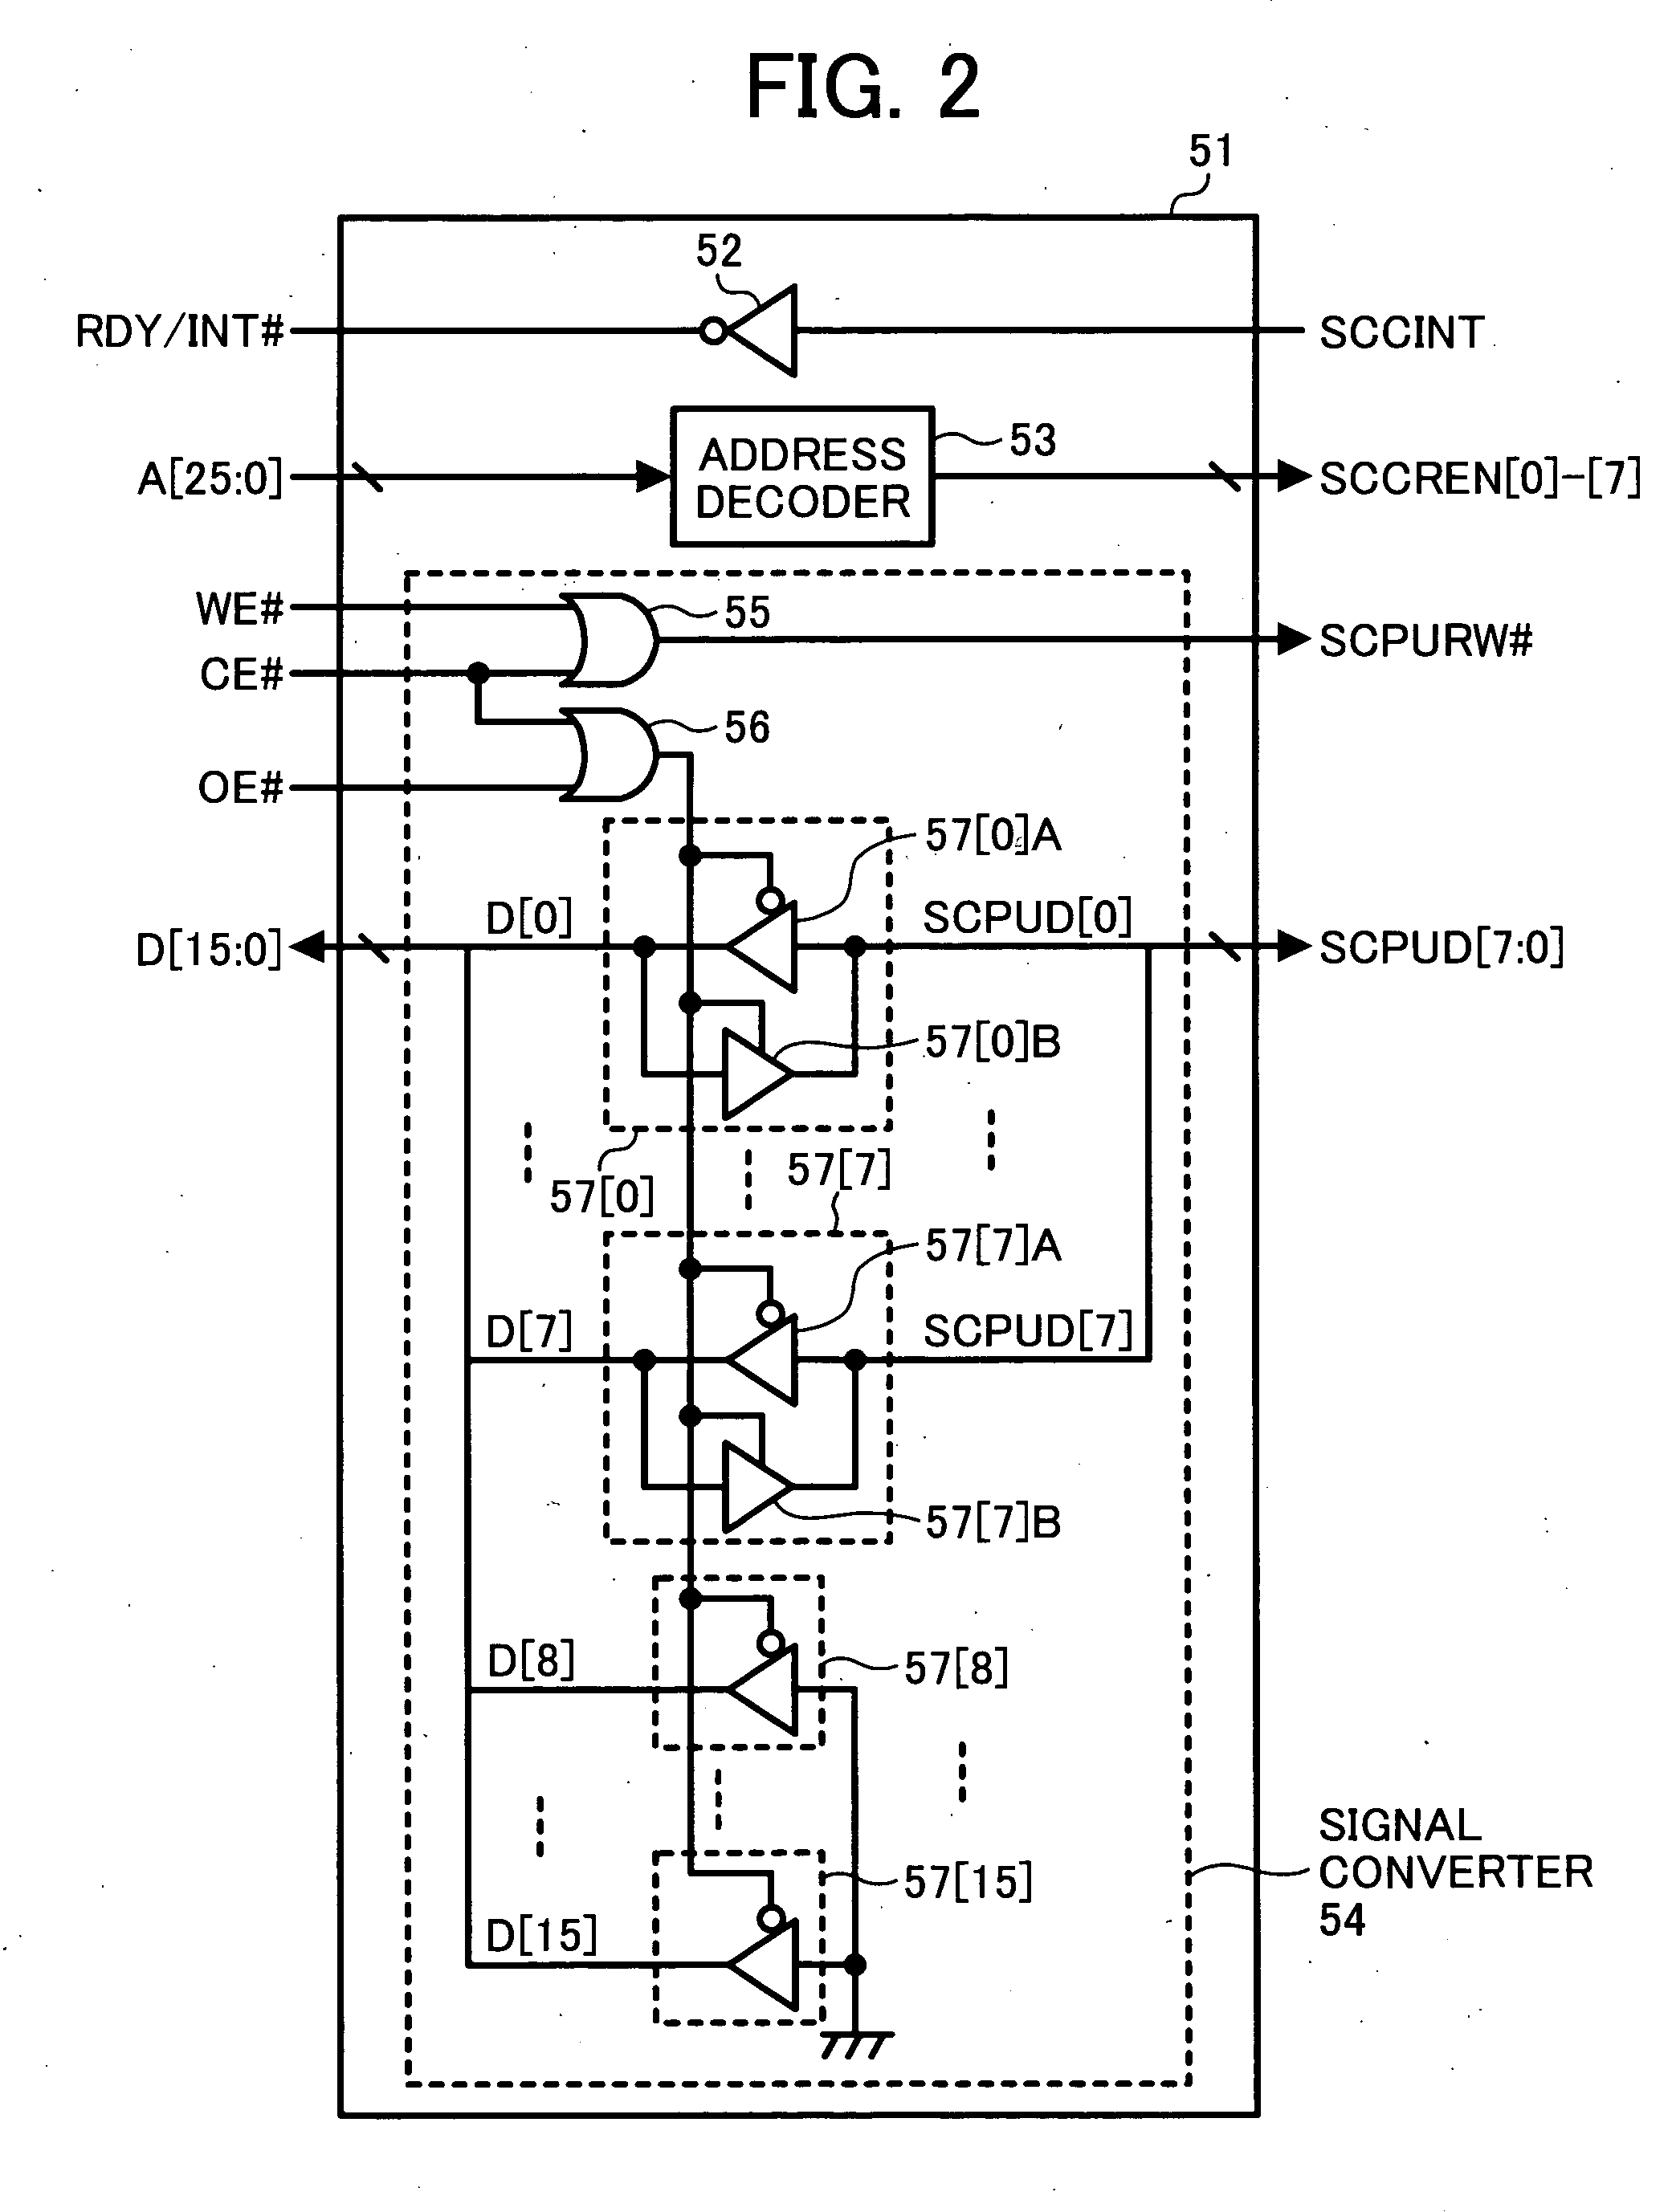 Card recognition system for recognizing standard card and non-standard card